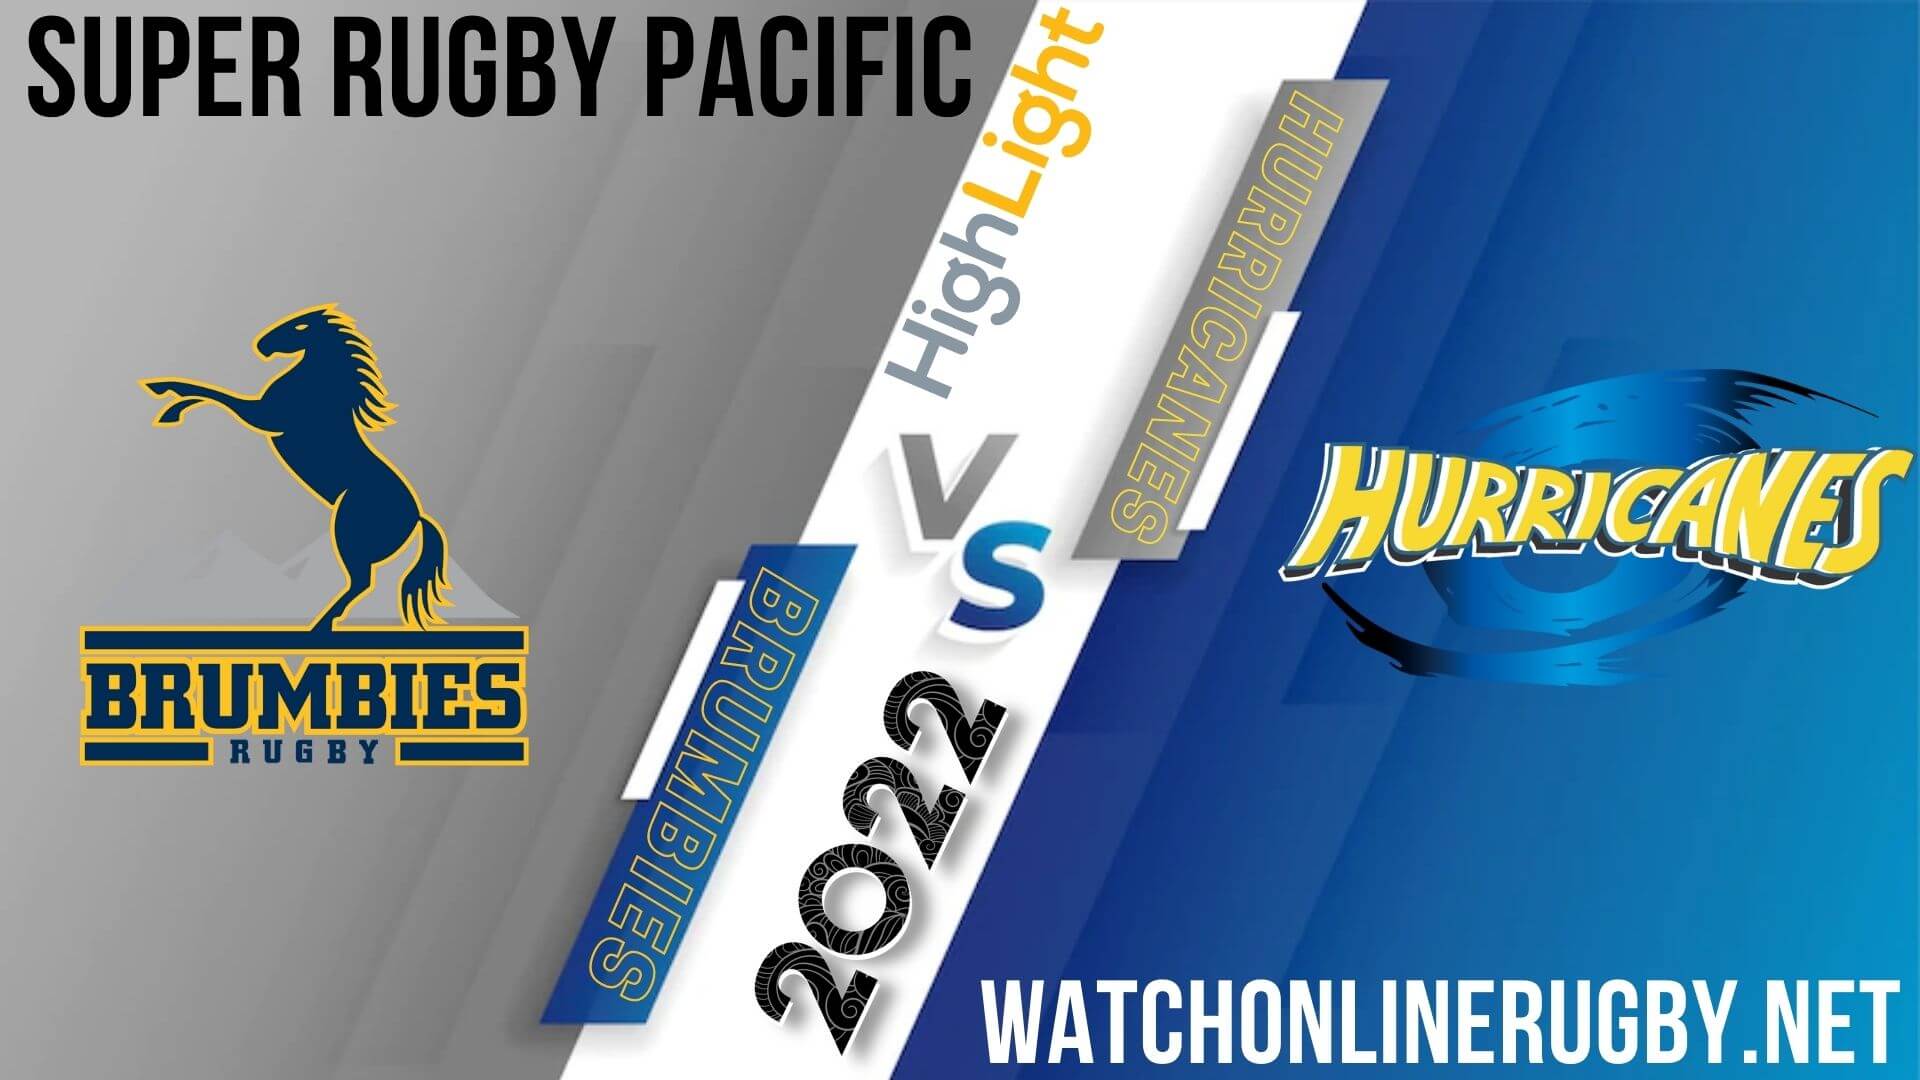 Brumbies Vs Hurricanes Super Rugby Pacific 2022 RD 11